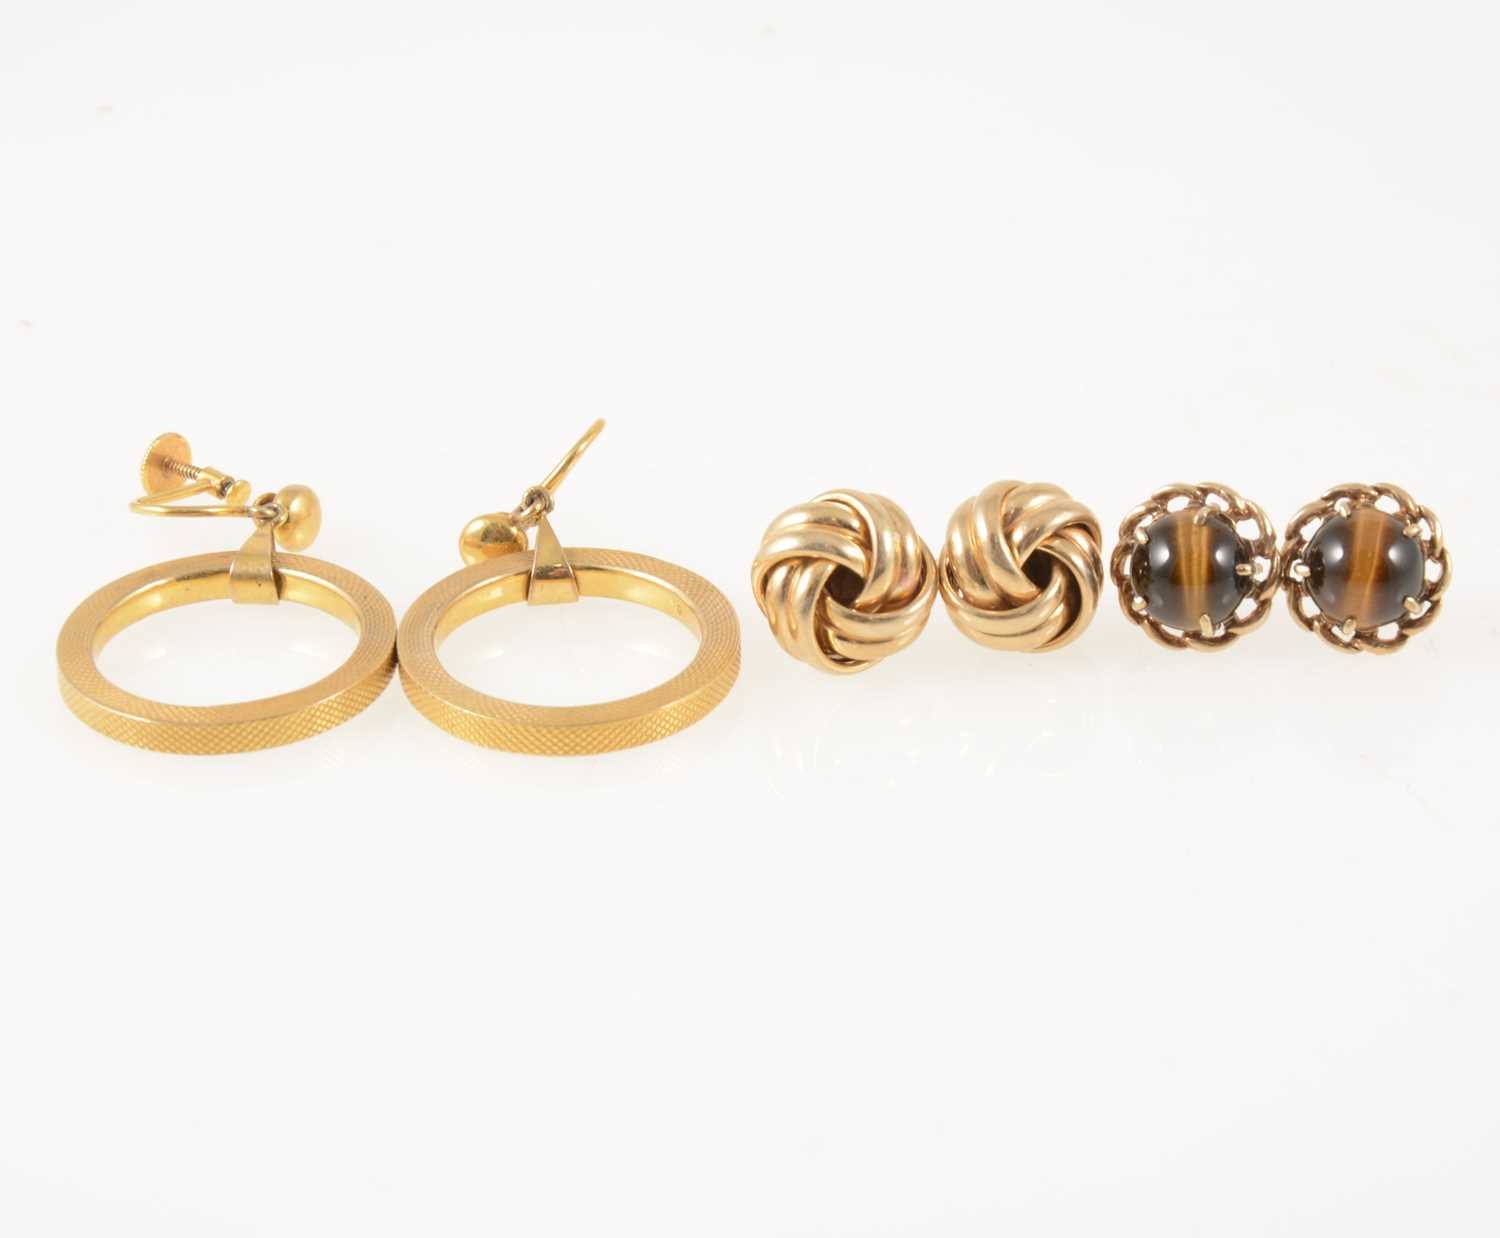 Lot 59 - Three pairs of gold earrings.